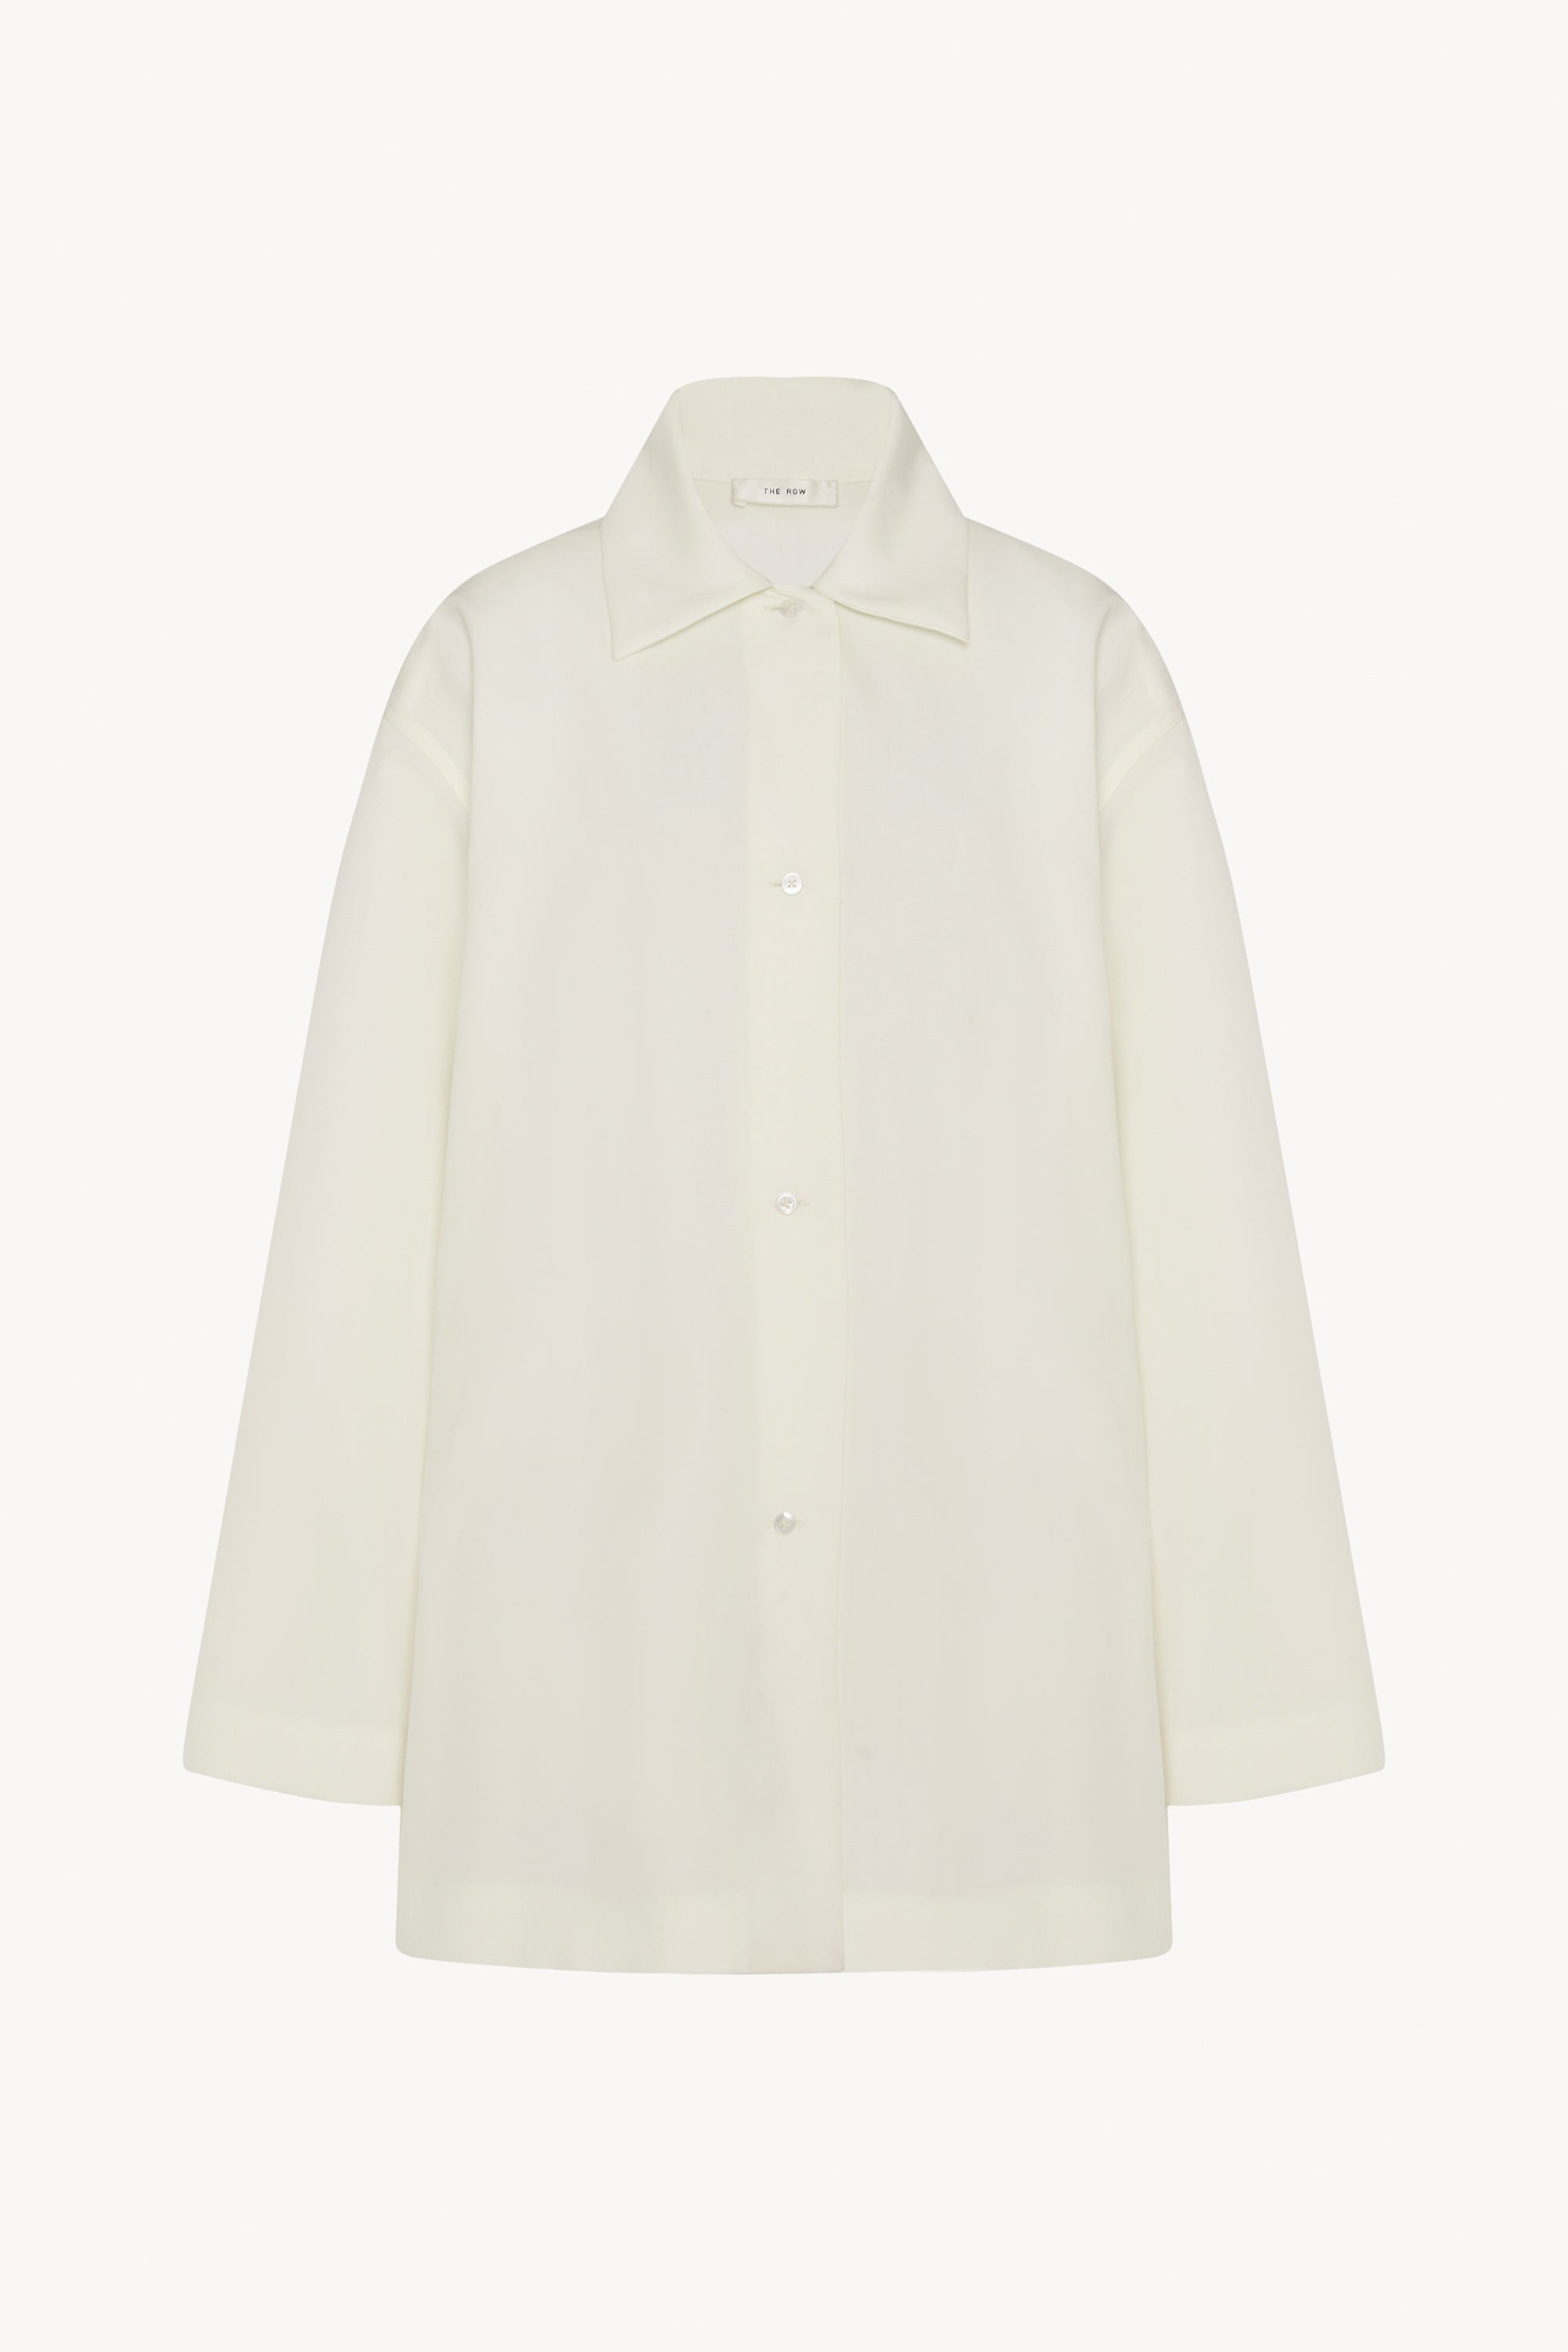 Rigel Shirt White in Wool – The Row